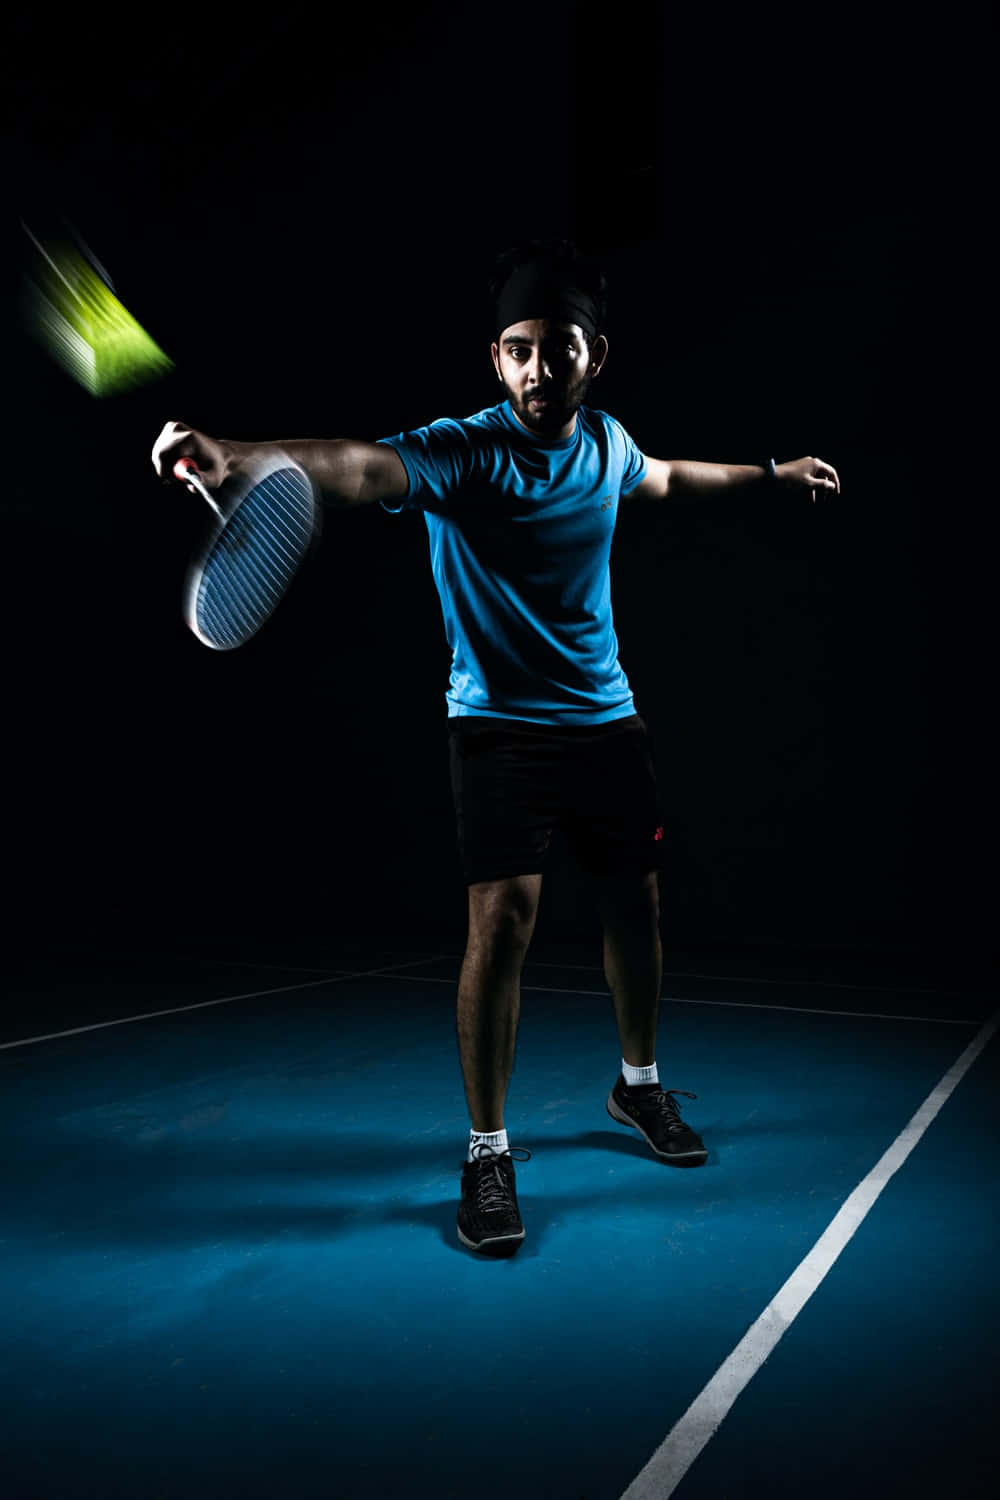 Take your badminton game to a whole new level with an Android app!